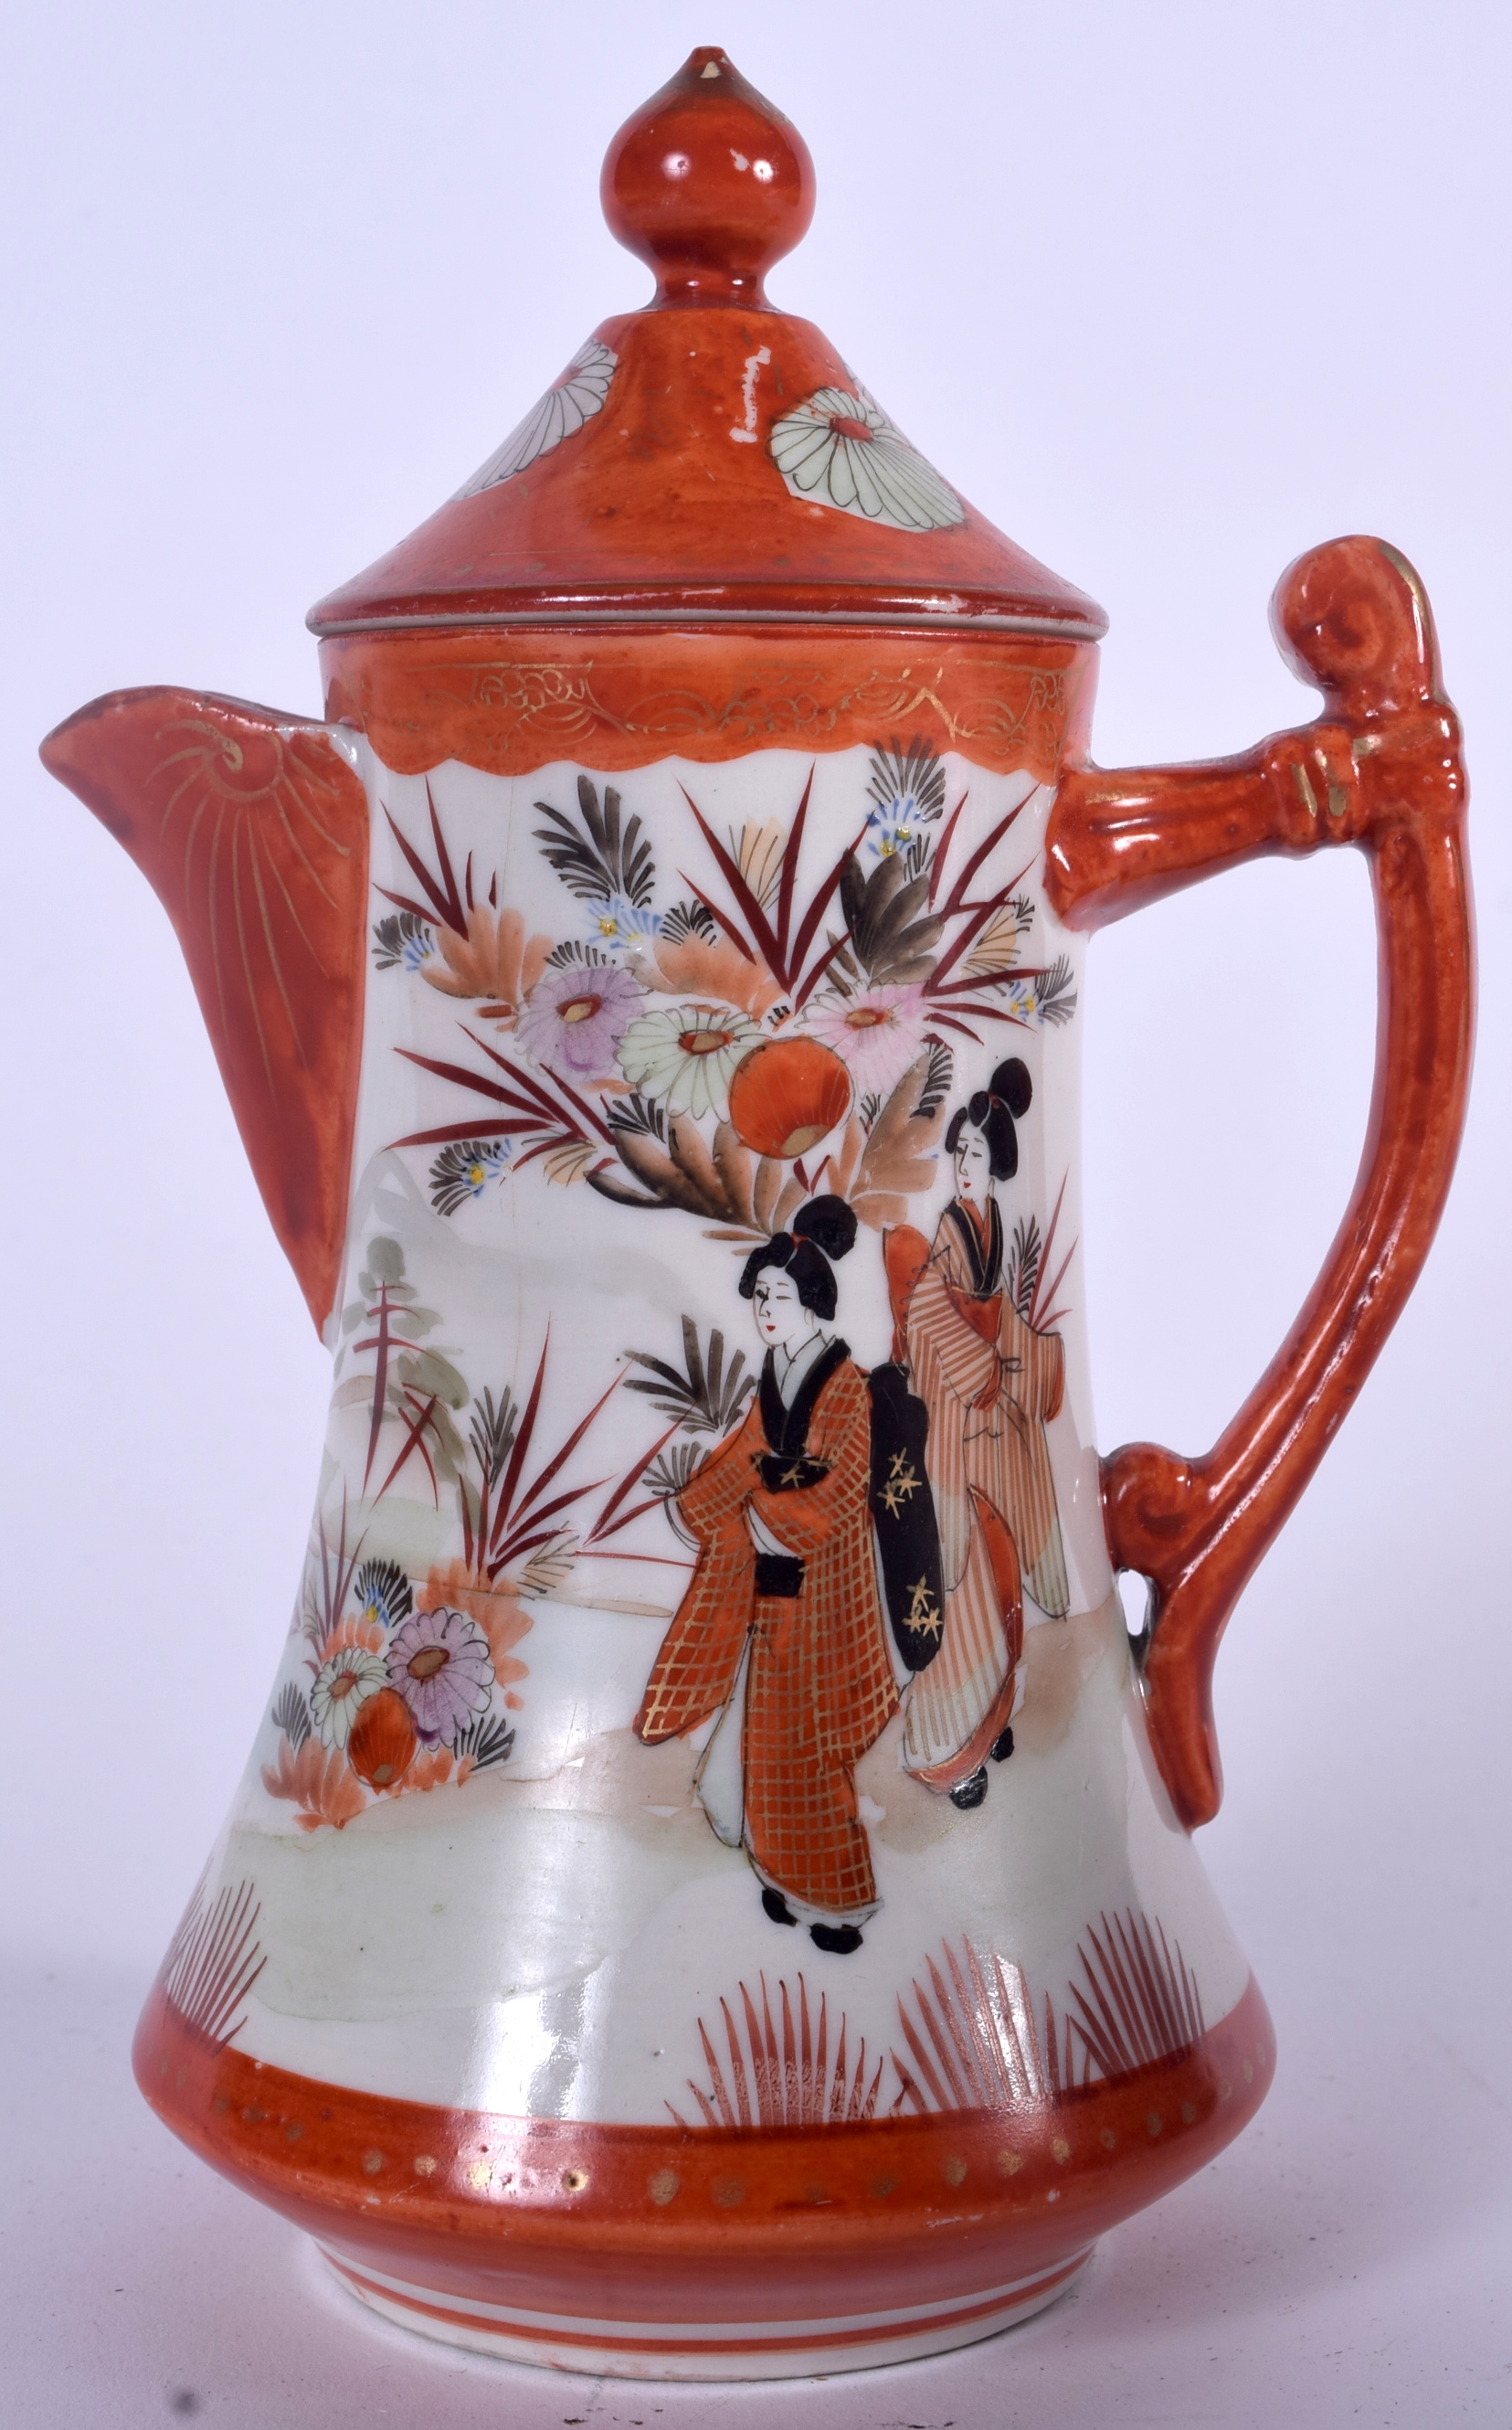 AN EARLY 20TH CENTURY JAPANESE KUTANI PORCELAIN JUG, painted with geisha girls in a landscape, sign